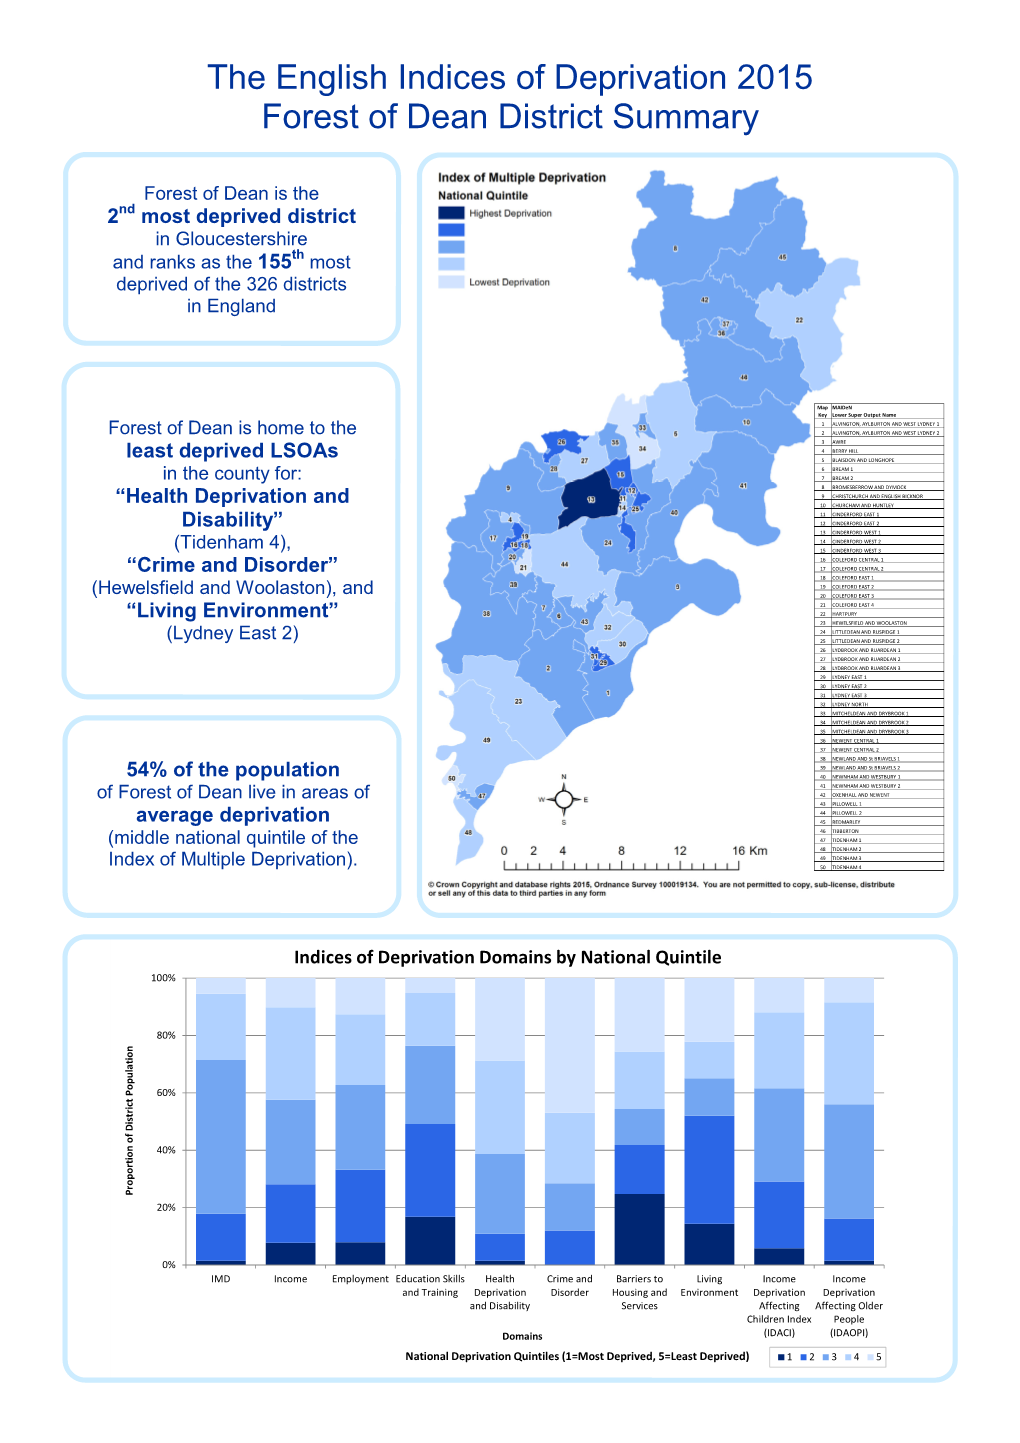 The English Indices of Deprivation 2015 Forest of Dean District Summary